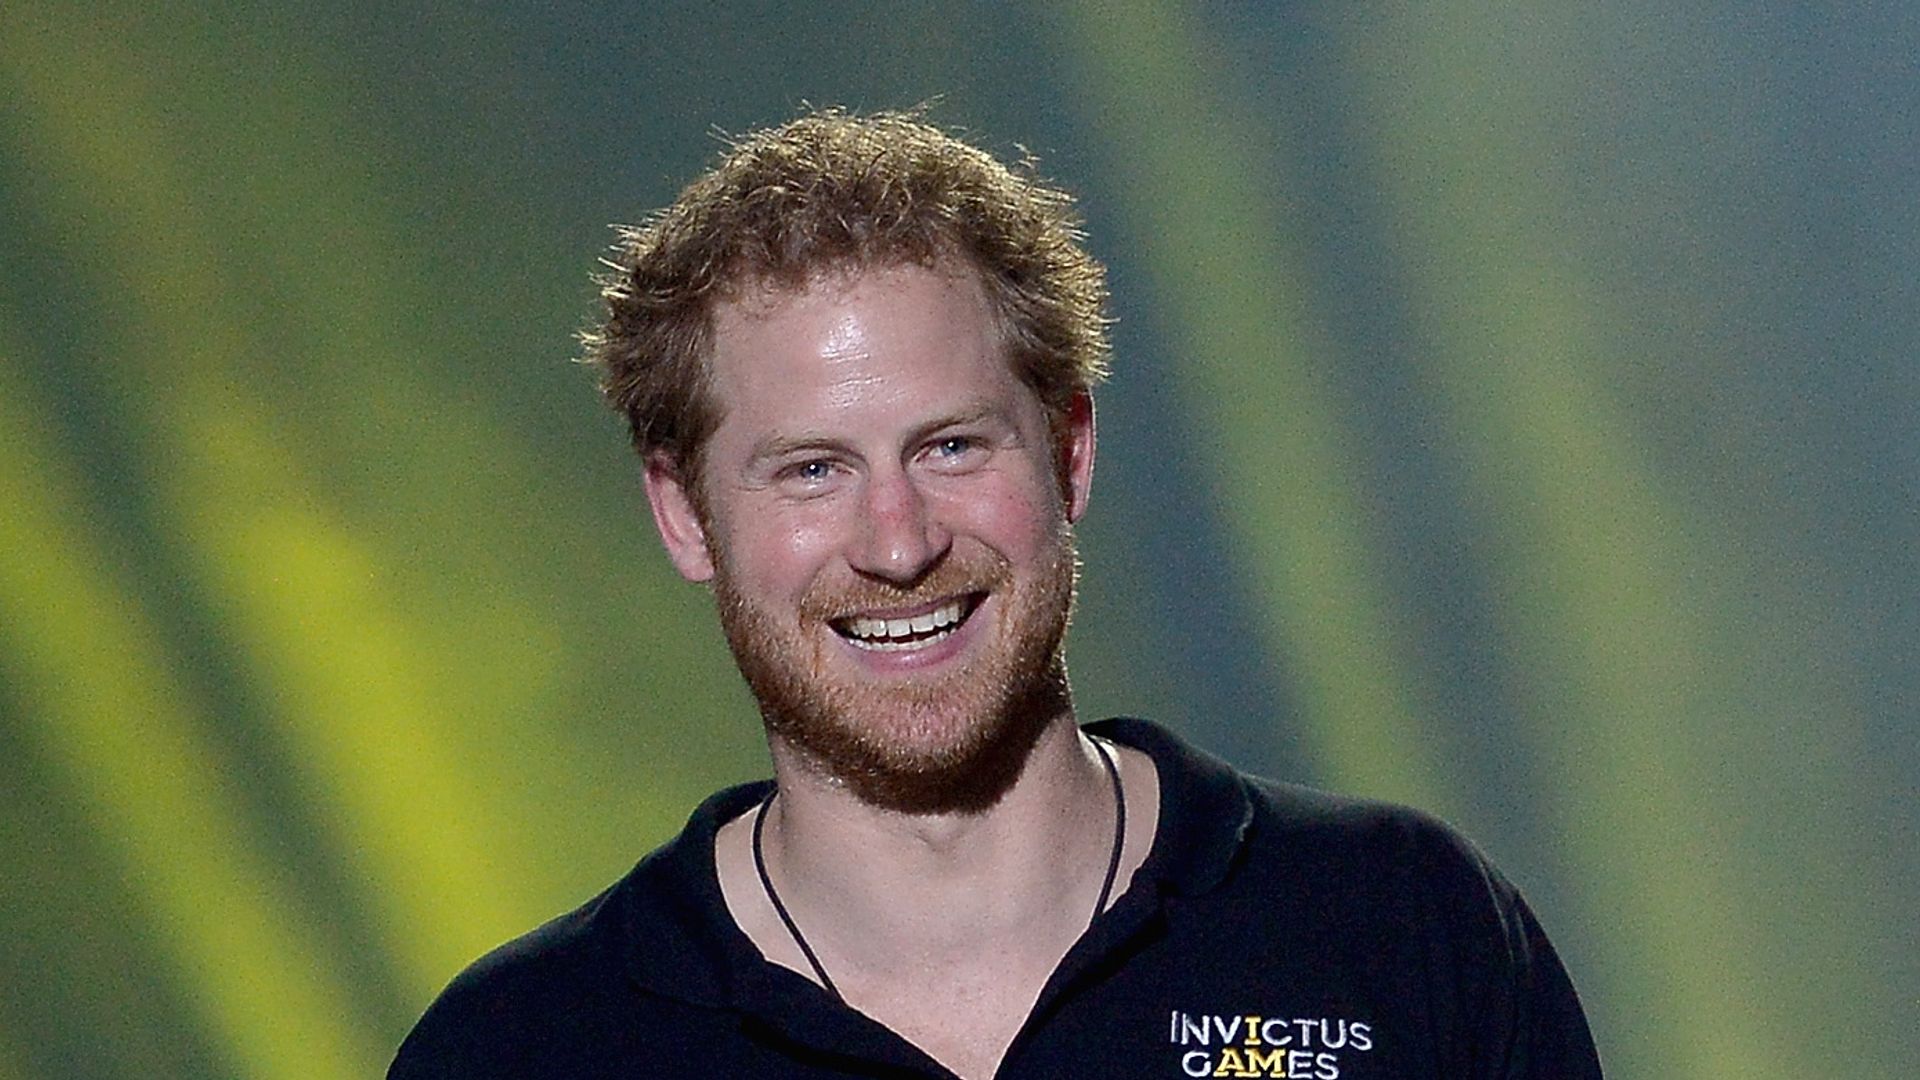 Prince Harry closing remarks during the Invictus Games Orlando 2016 - Closing Ceremony at ESPN Wide World of Sports Complex on May 12, 2016 in Lake Buena Vista, Florida.  (Photo by Gustavo Caballero/Getty Images for Invictus Games)